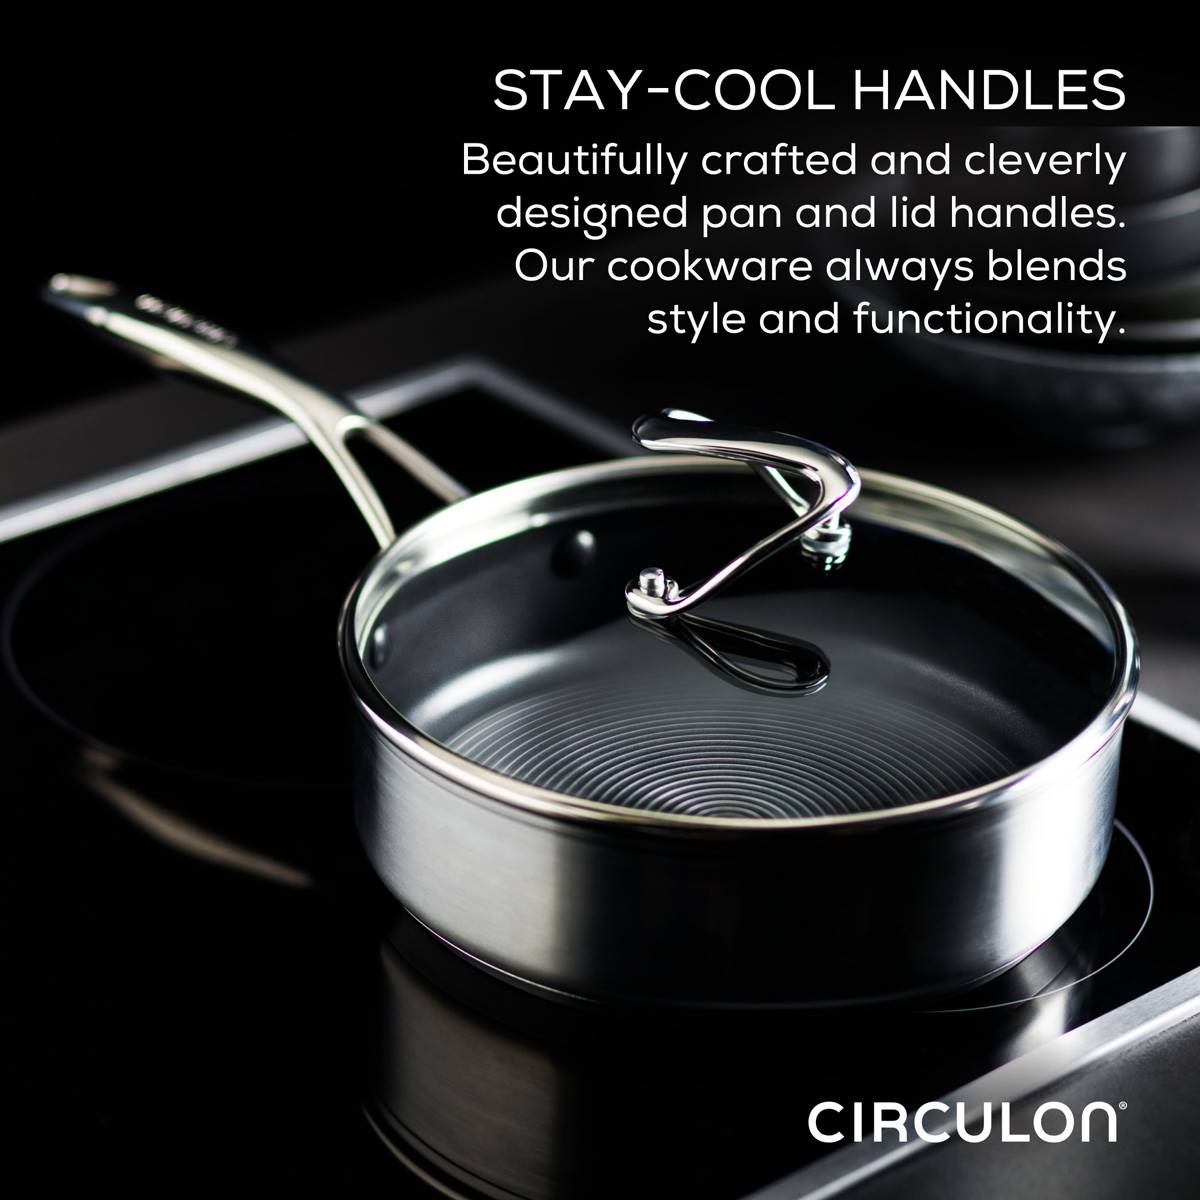 Circulon(R) 11pc. Stainless Steel Cookware Set